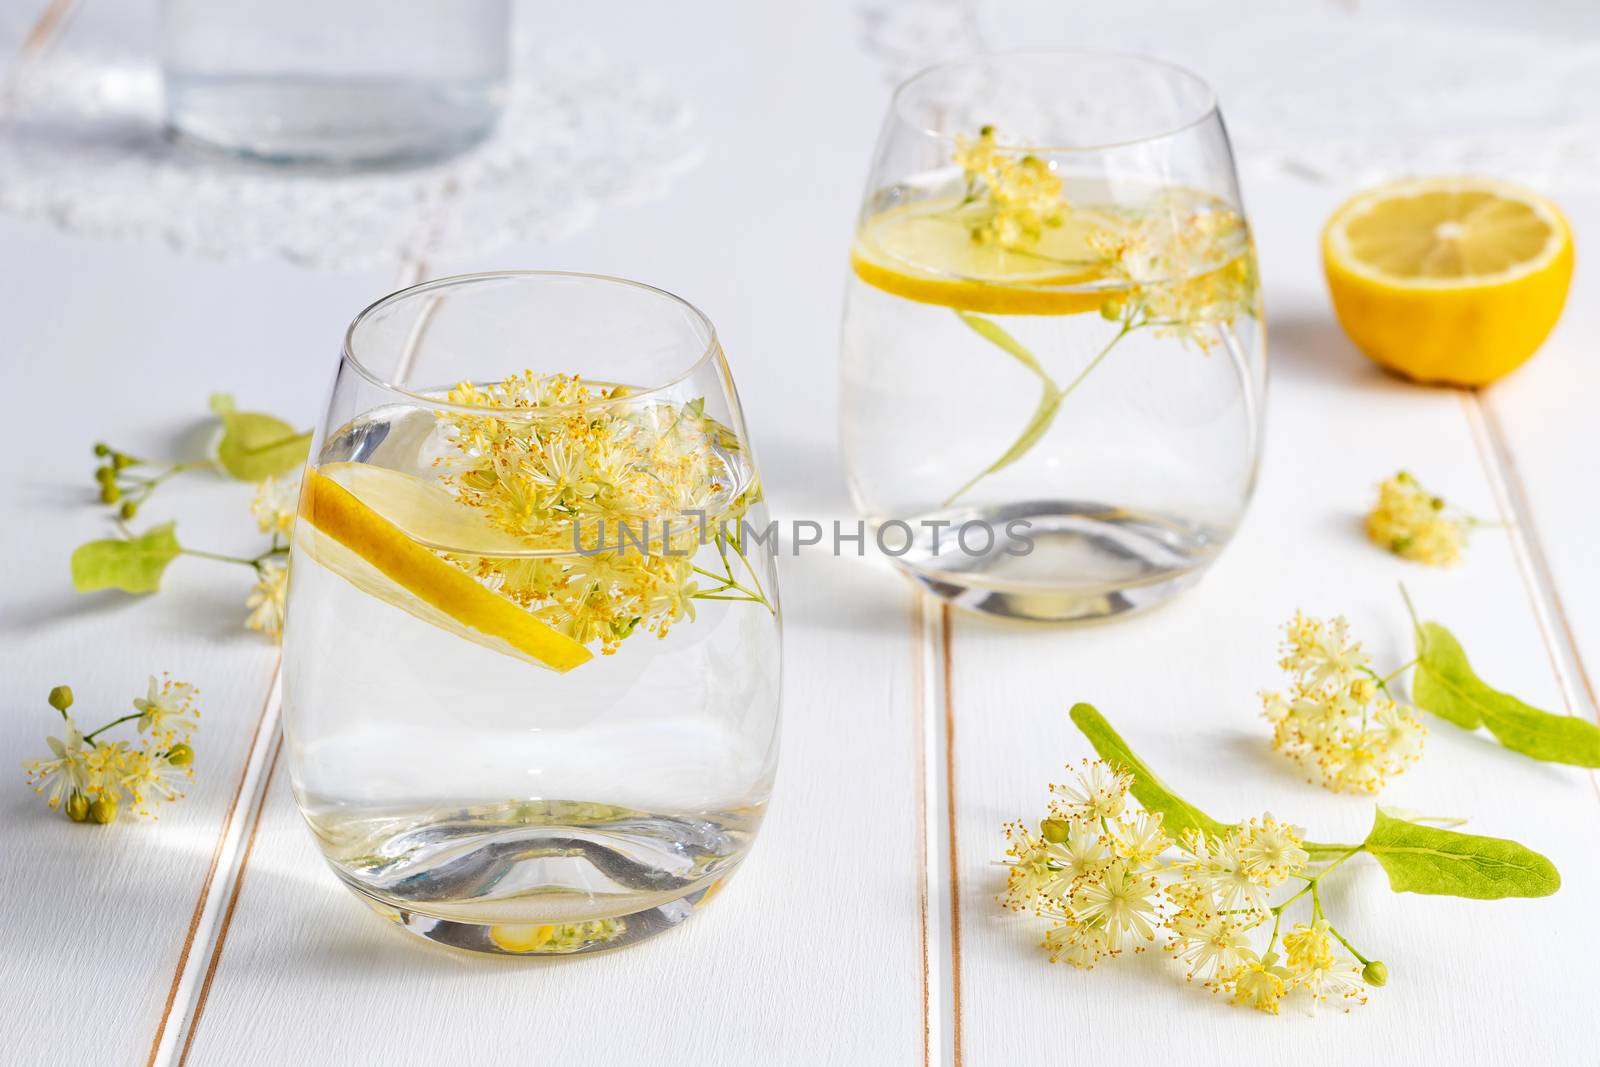 Two glasses of lemonade with fresh linden flowers and lemon